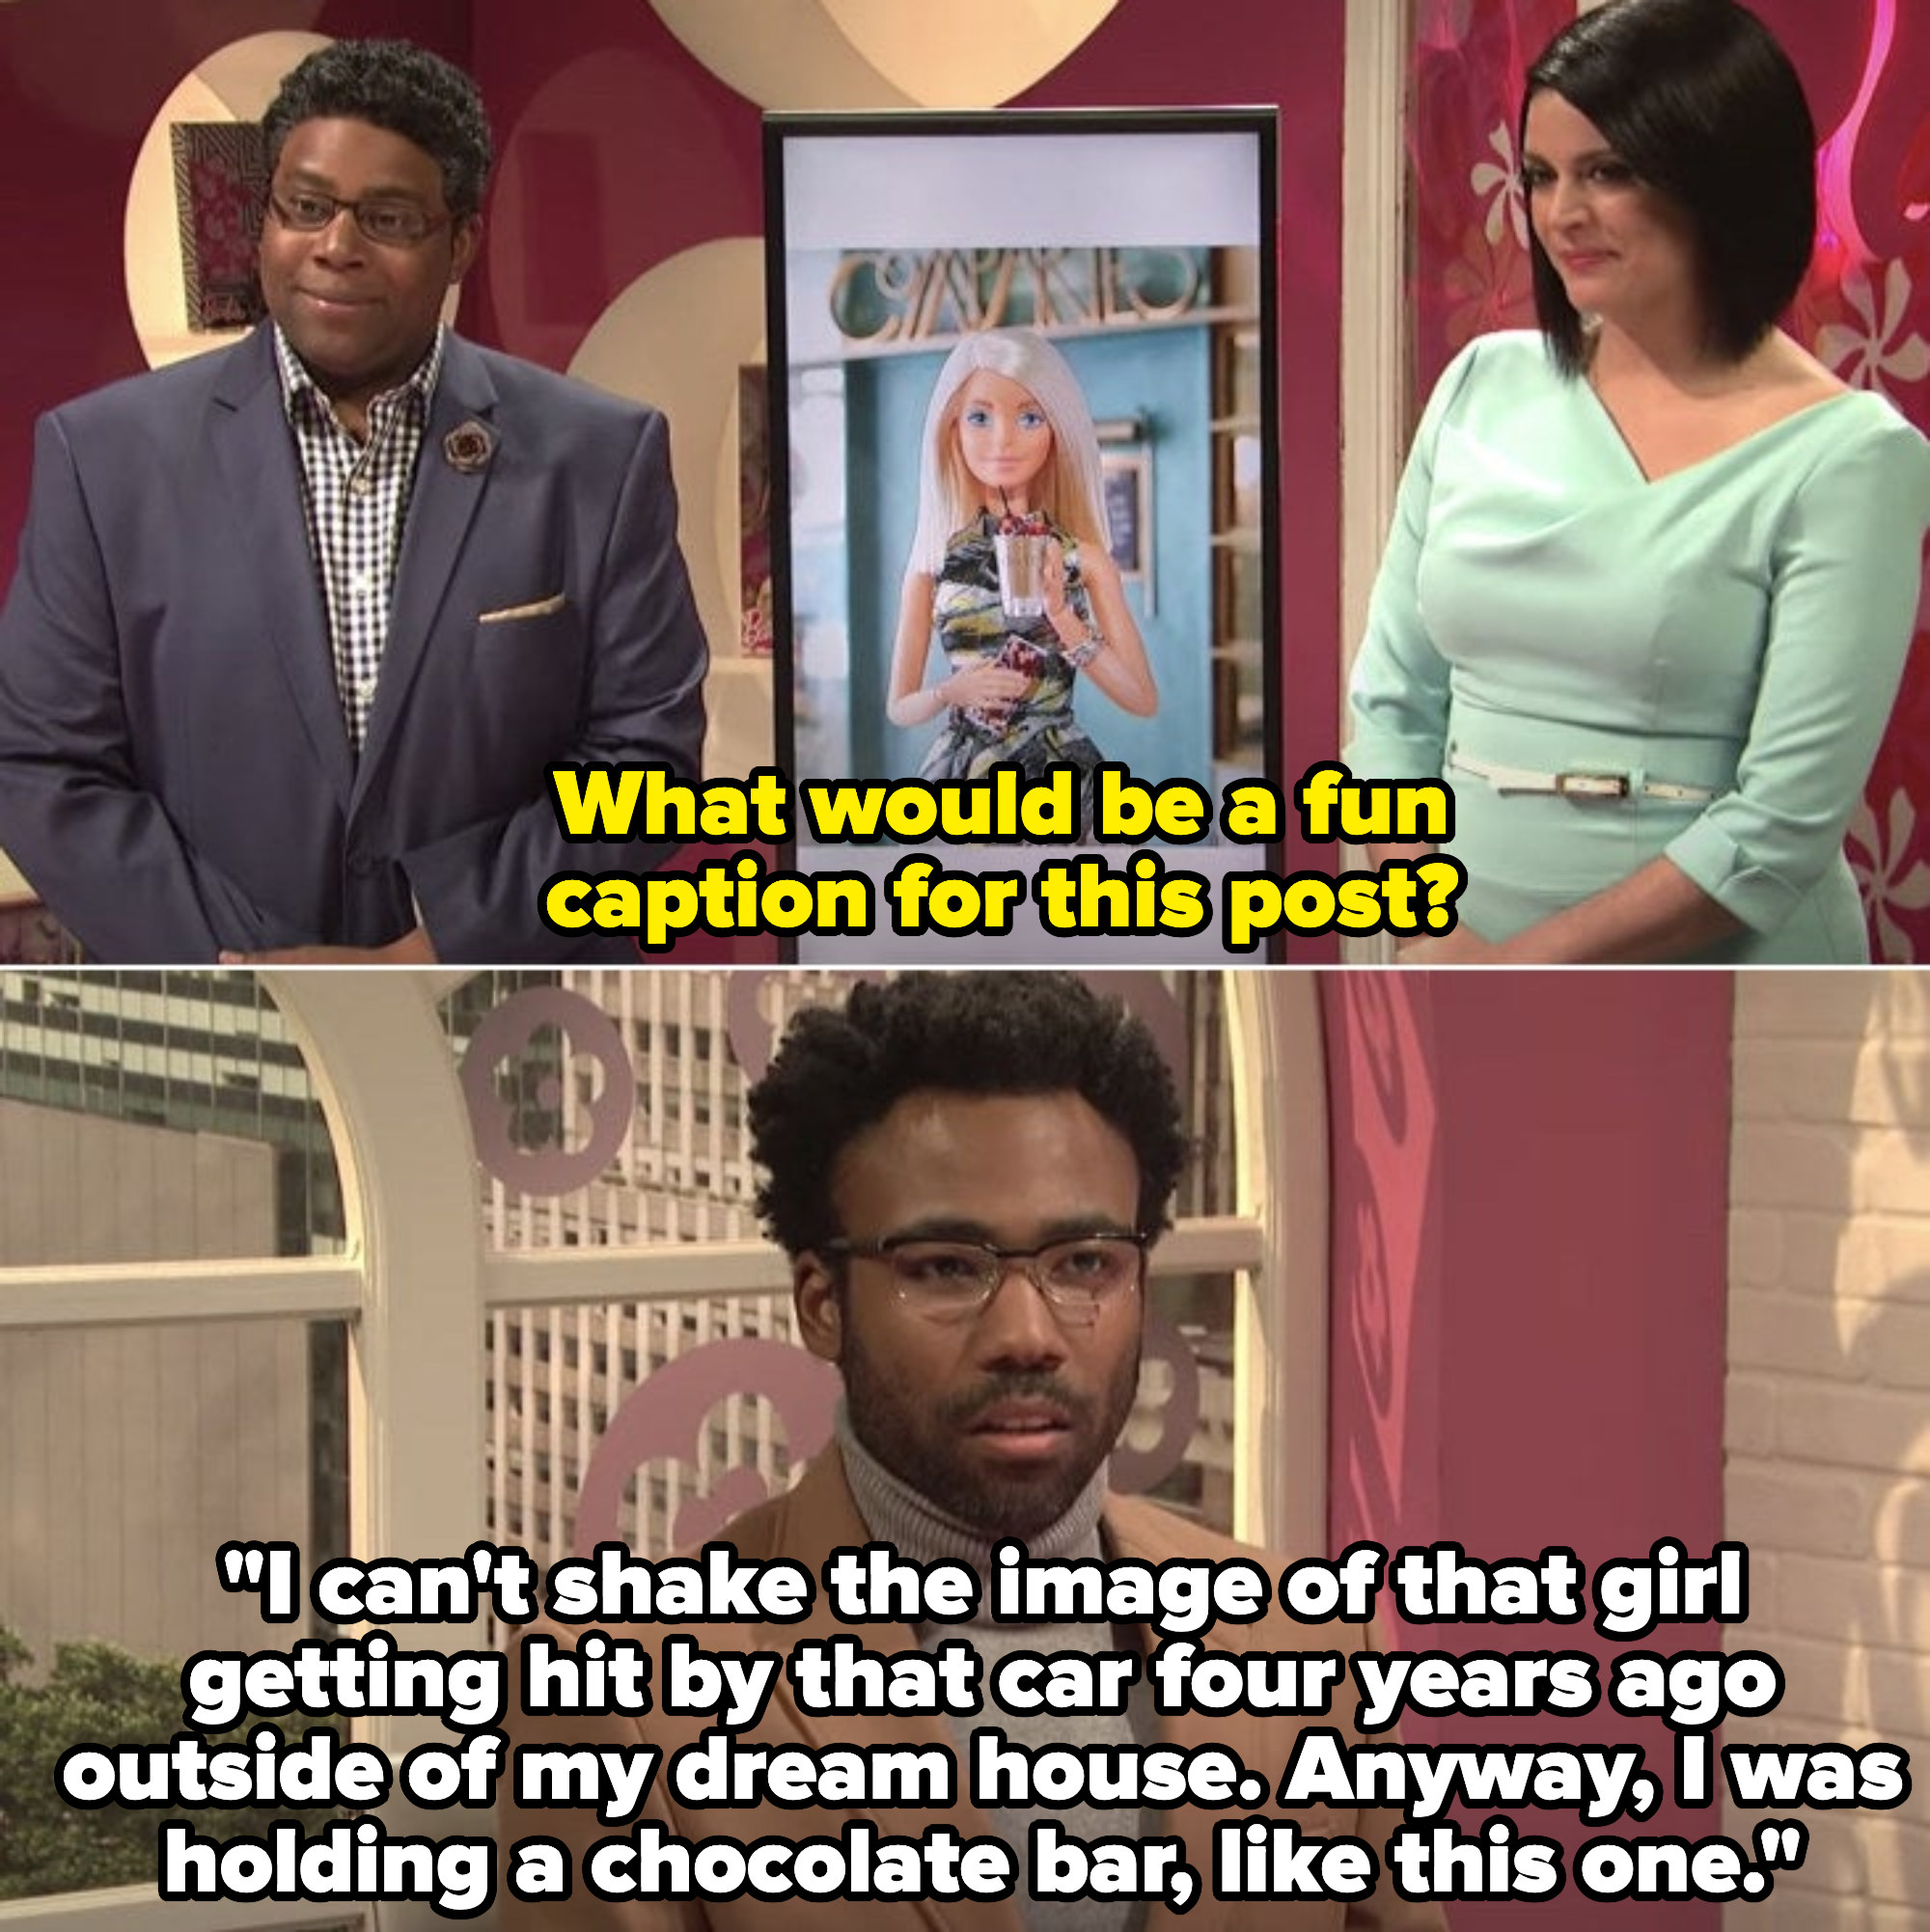 Donald Glover in the &quot;Barbie Instagram&quot; sketch on SNL, pitching a strange Instagram caption: &quot;I can&#x27;t shake the image of that girl getting hit by that car four years ago outside of my dream house&quot;